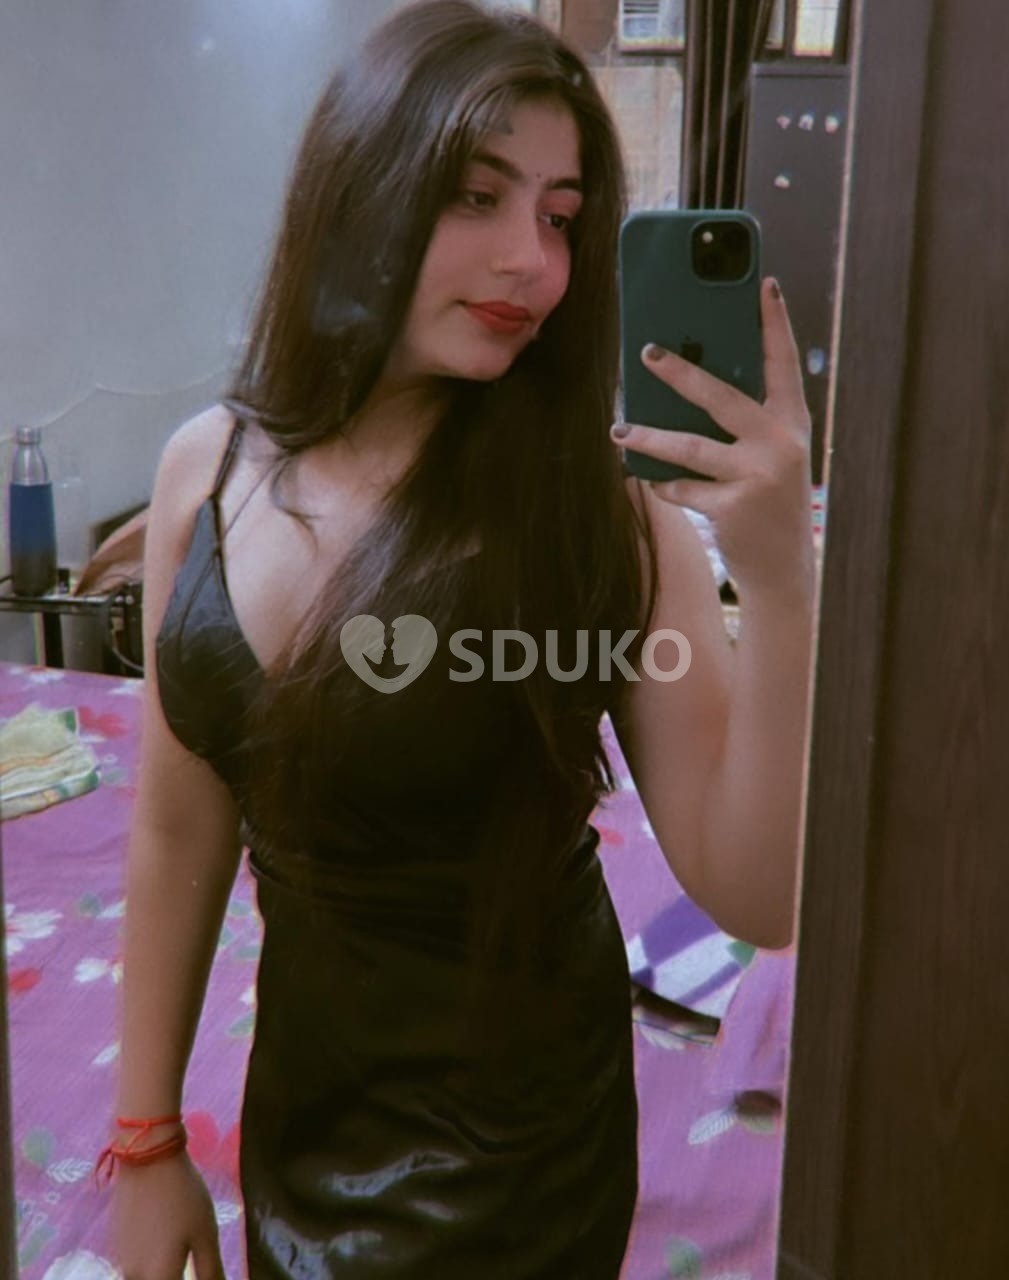 Chennai ⭐ ⭐√√ Best Vvip High Profile College And Bhabhis Safe Escort Service Available